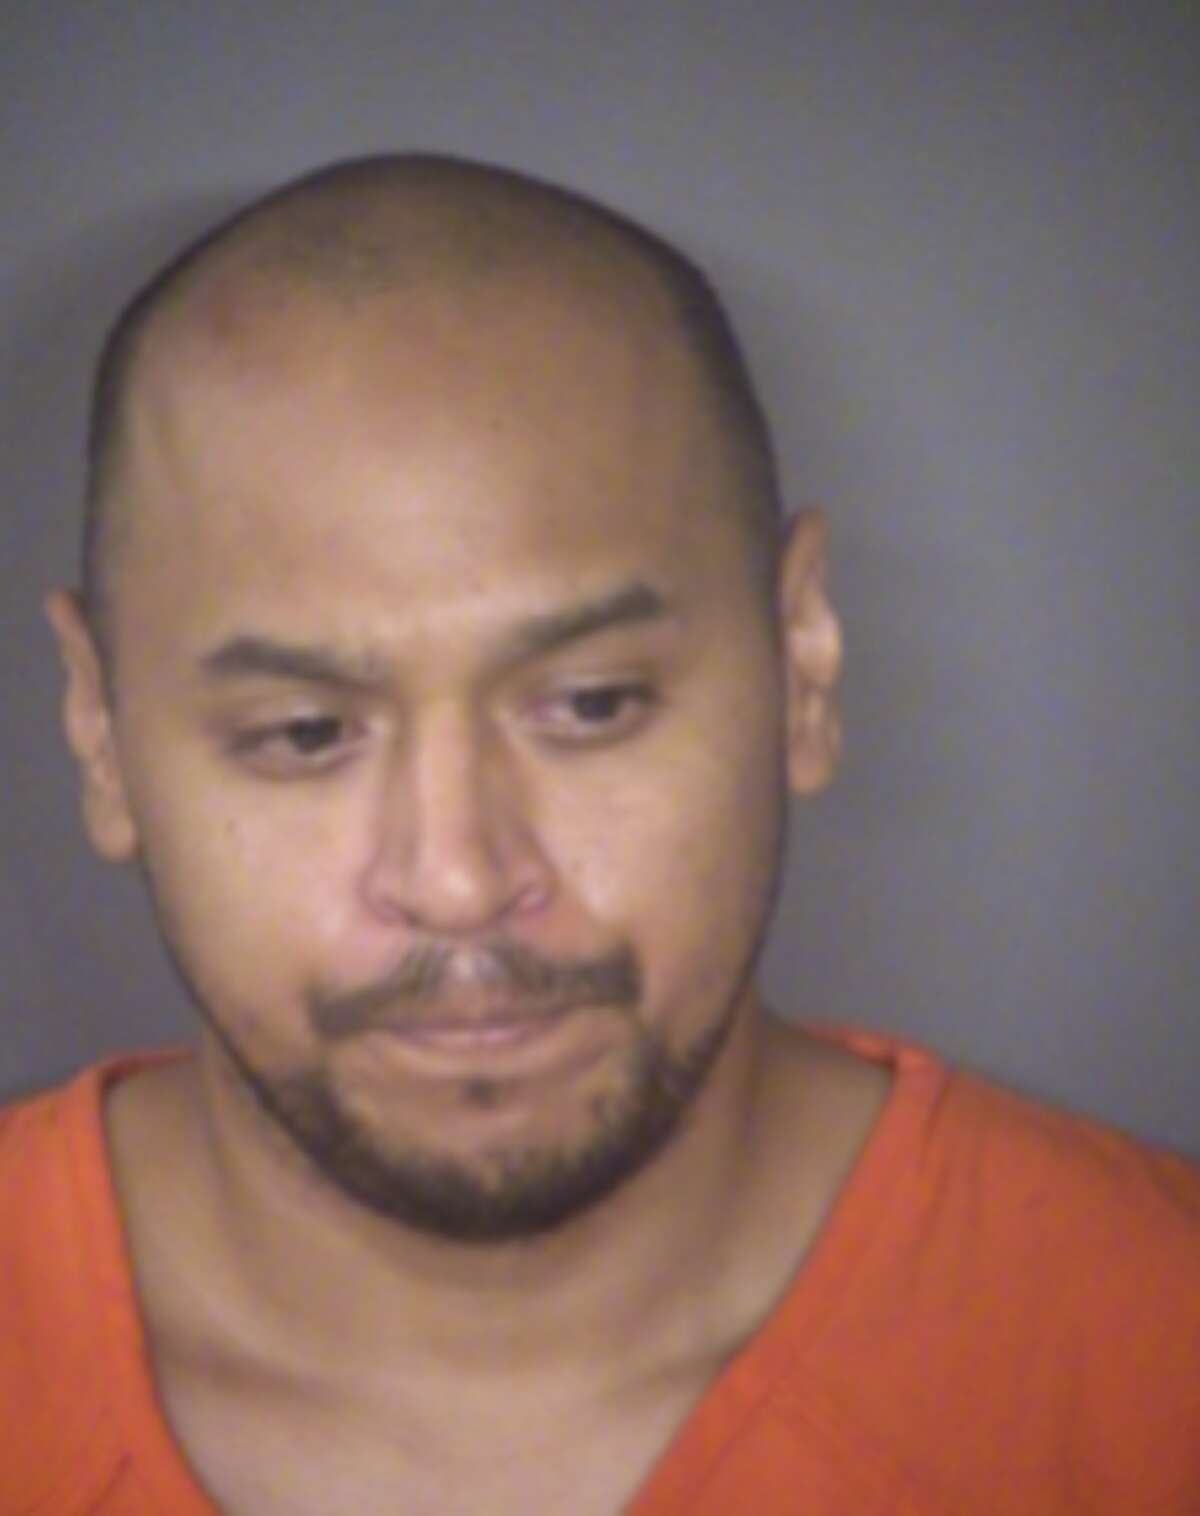 San Antonio police are searching for Sidney Cedillo, 31, after he allegedly stabbed a man at North Side home.